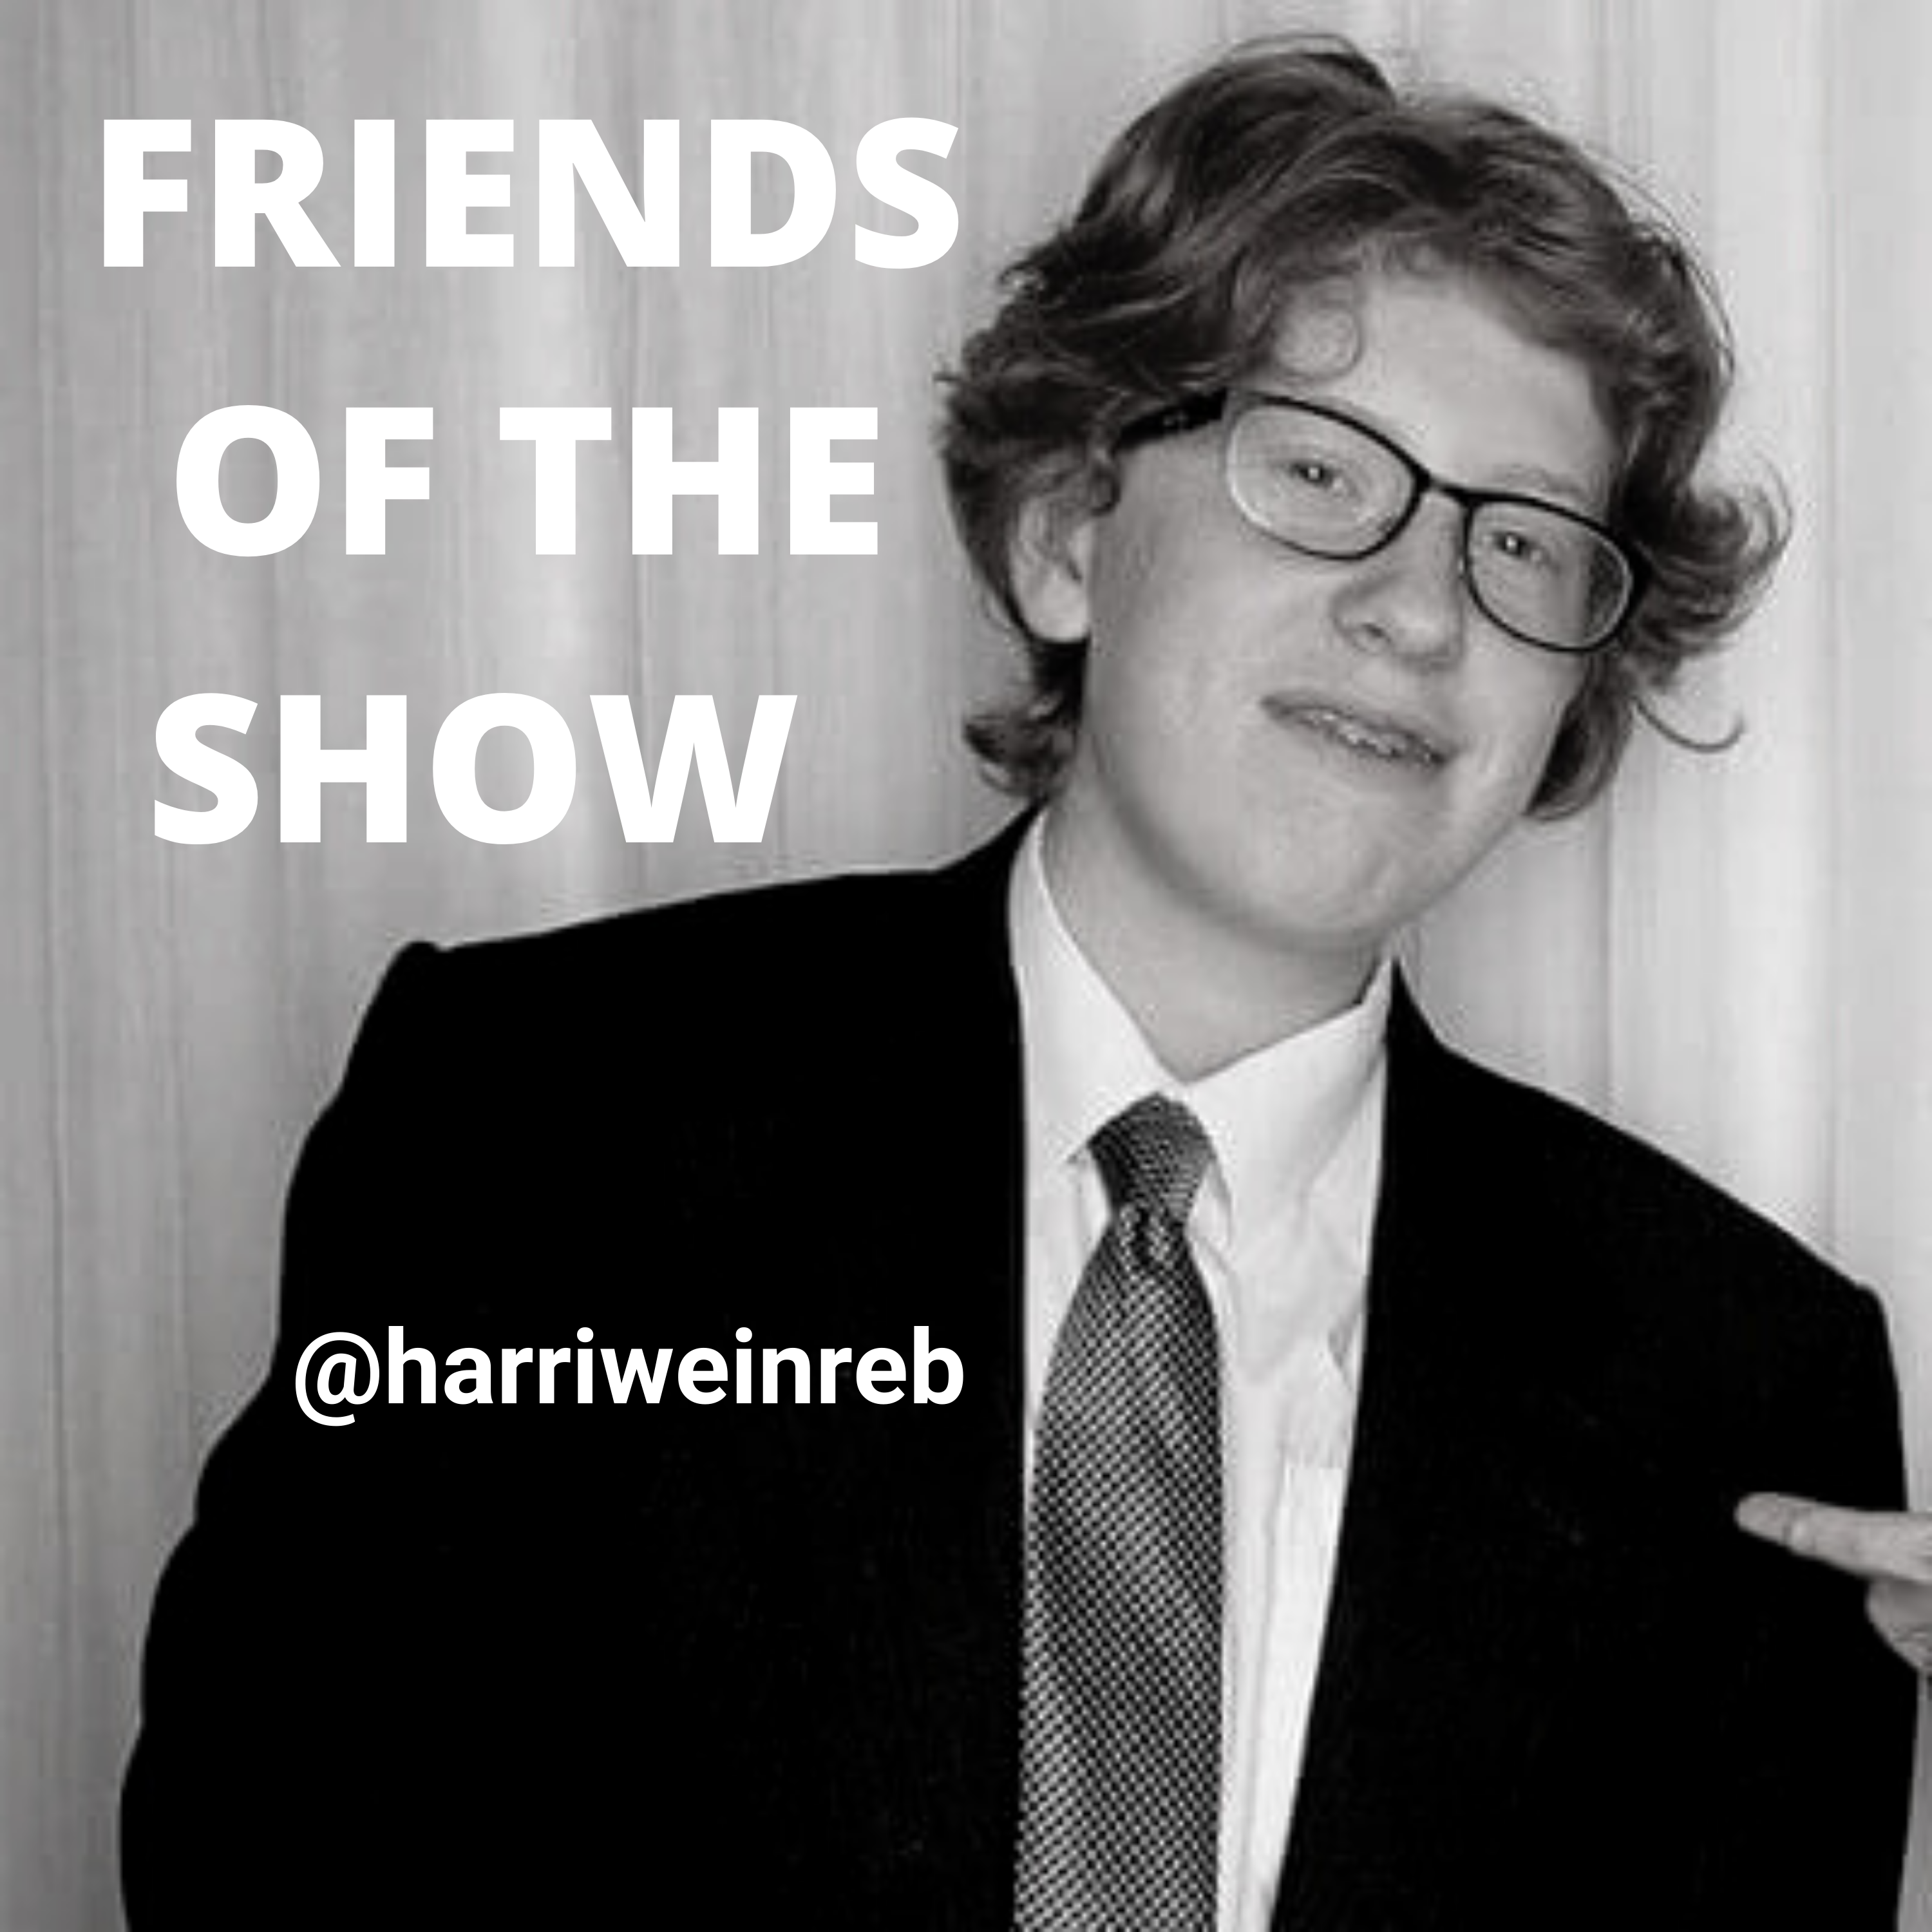 Friends of the Show with guest Harrison Weinreb